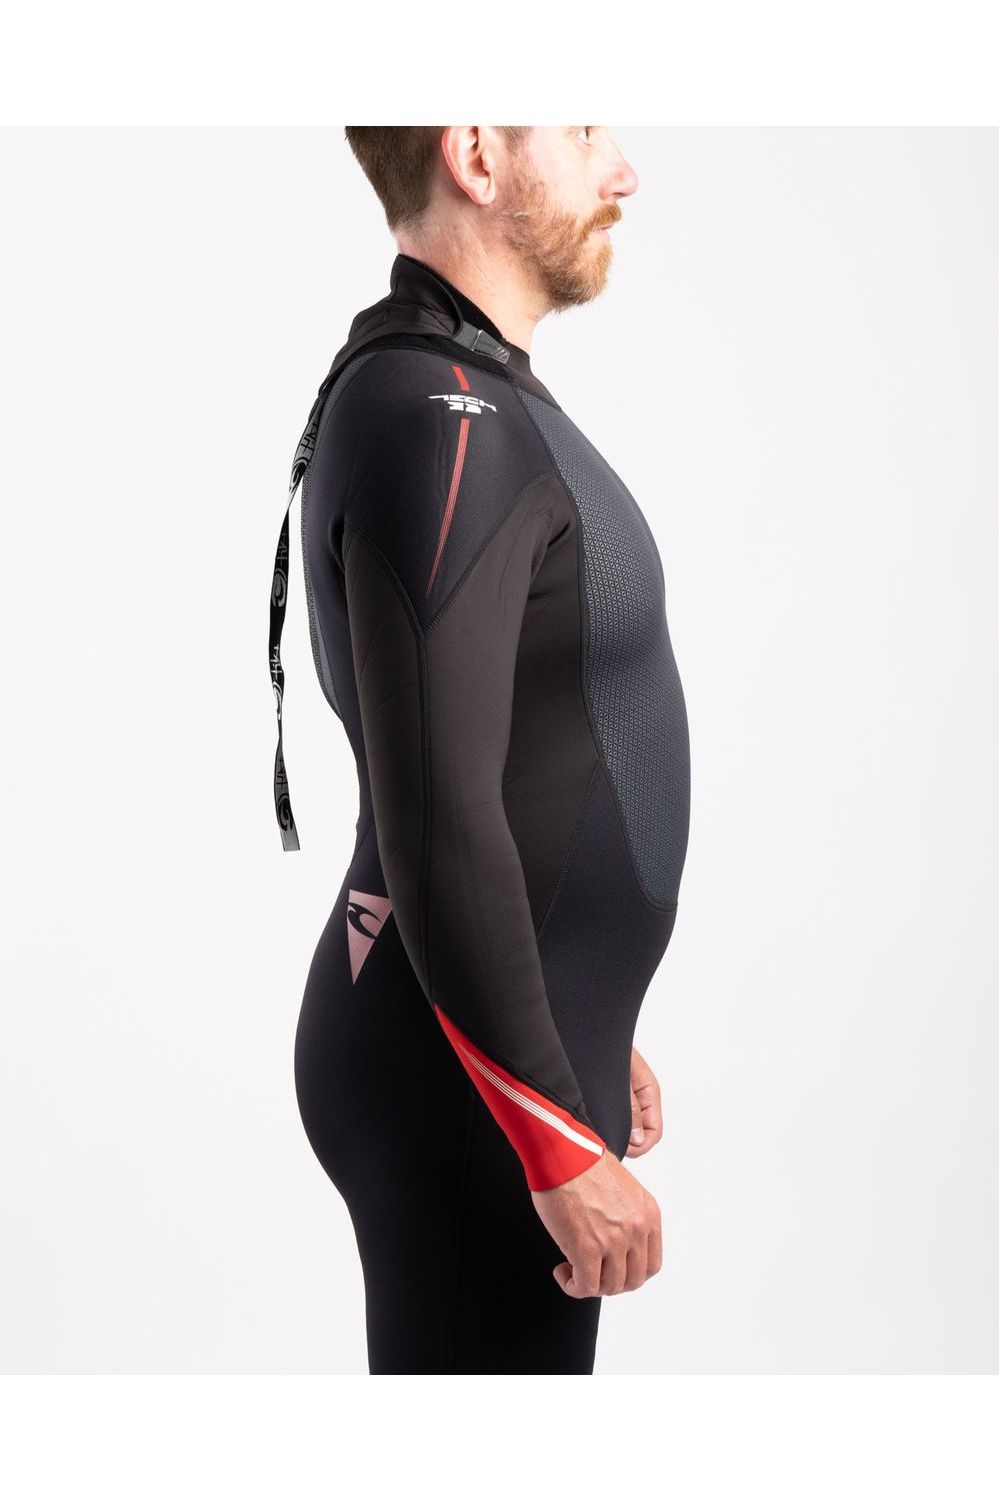 Tiki Tech 3/2 Steamer Wetsuit With Back Zip In Black & Red